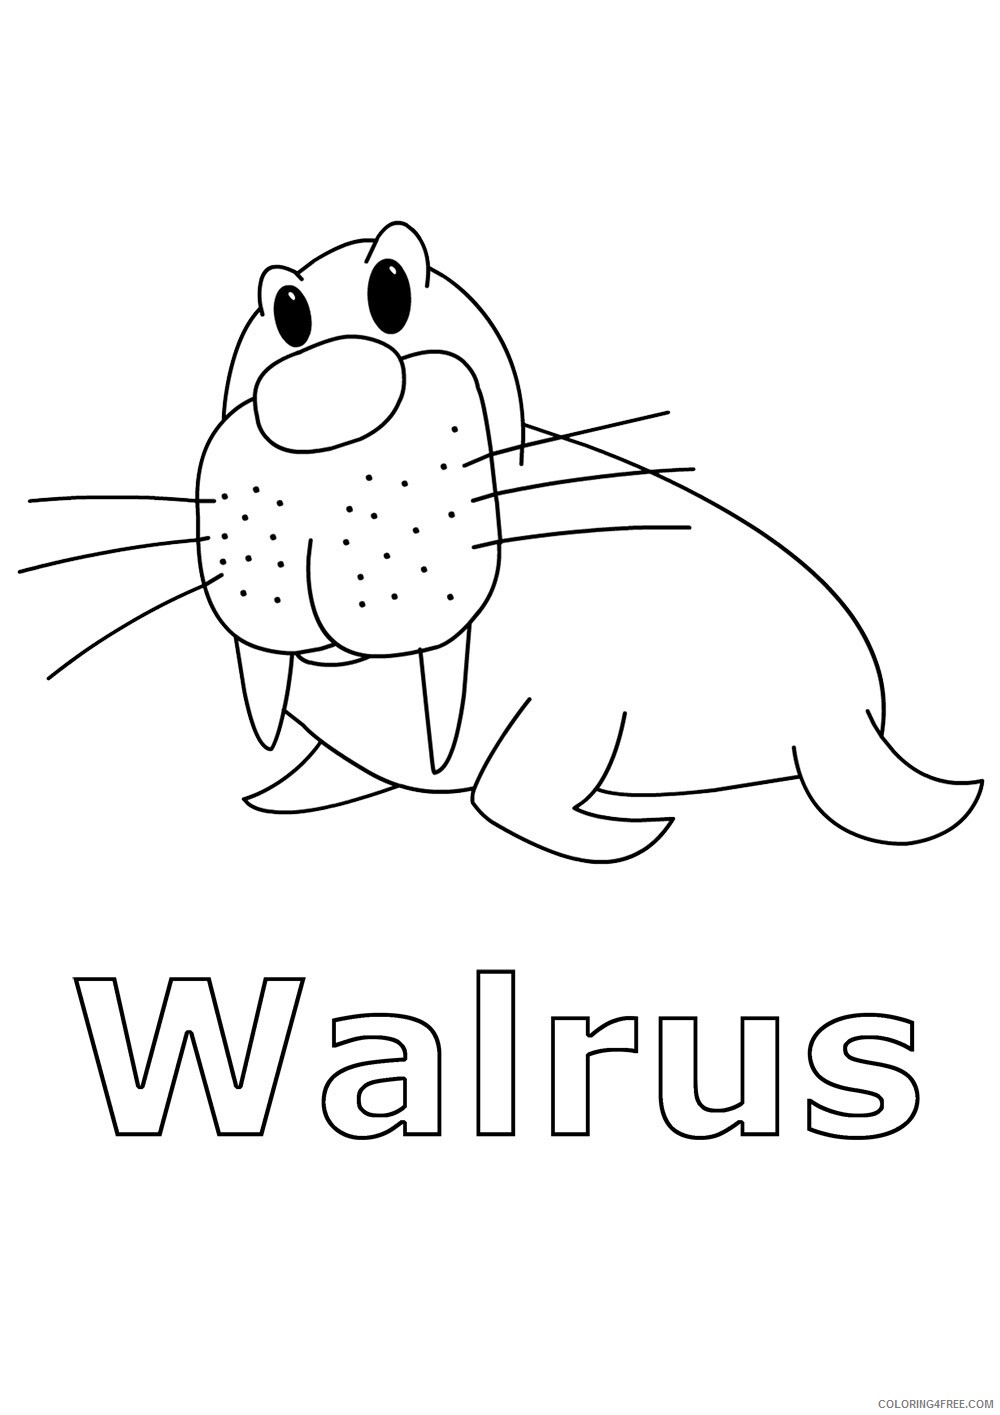 Walrus Coloring Pages Animal Printable Sheets Walrus Images 2021 4963 Coloring4free